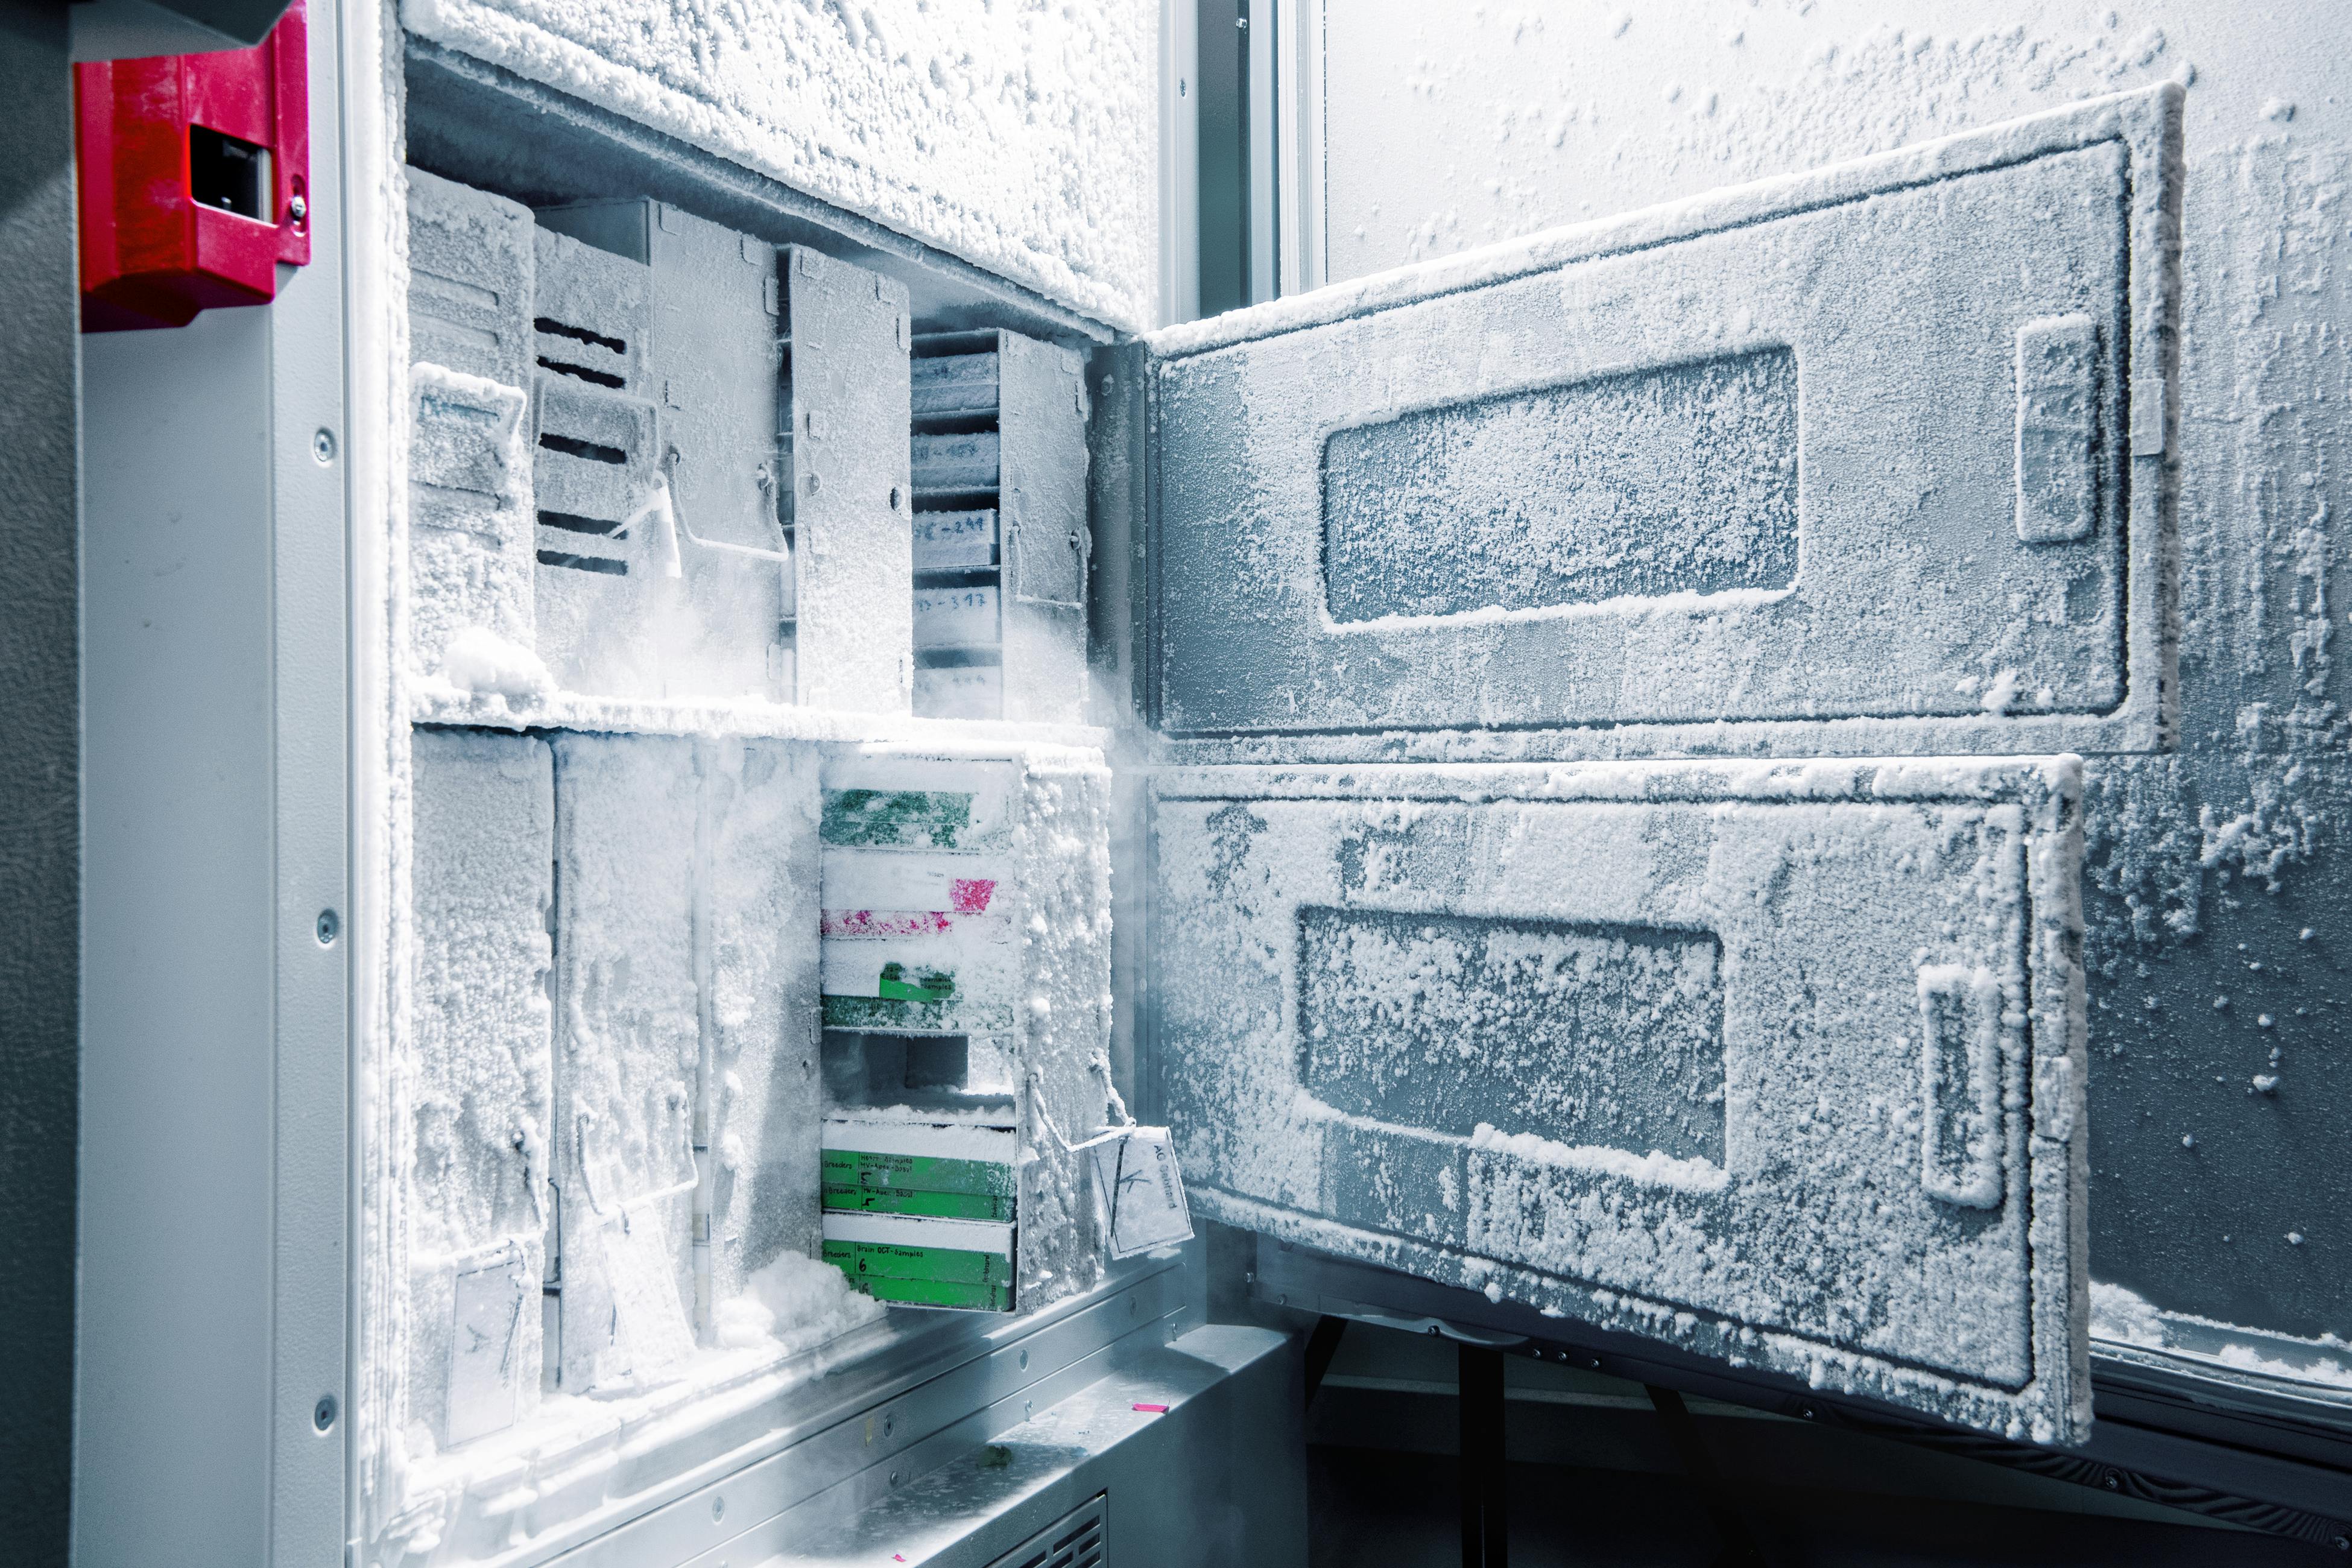 A freezer with patient samples